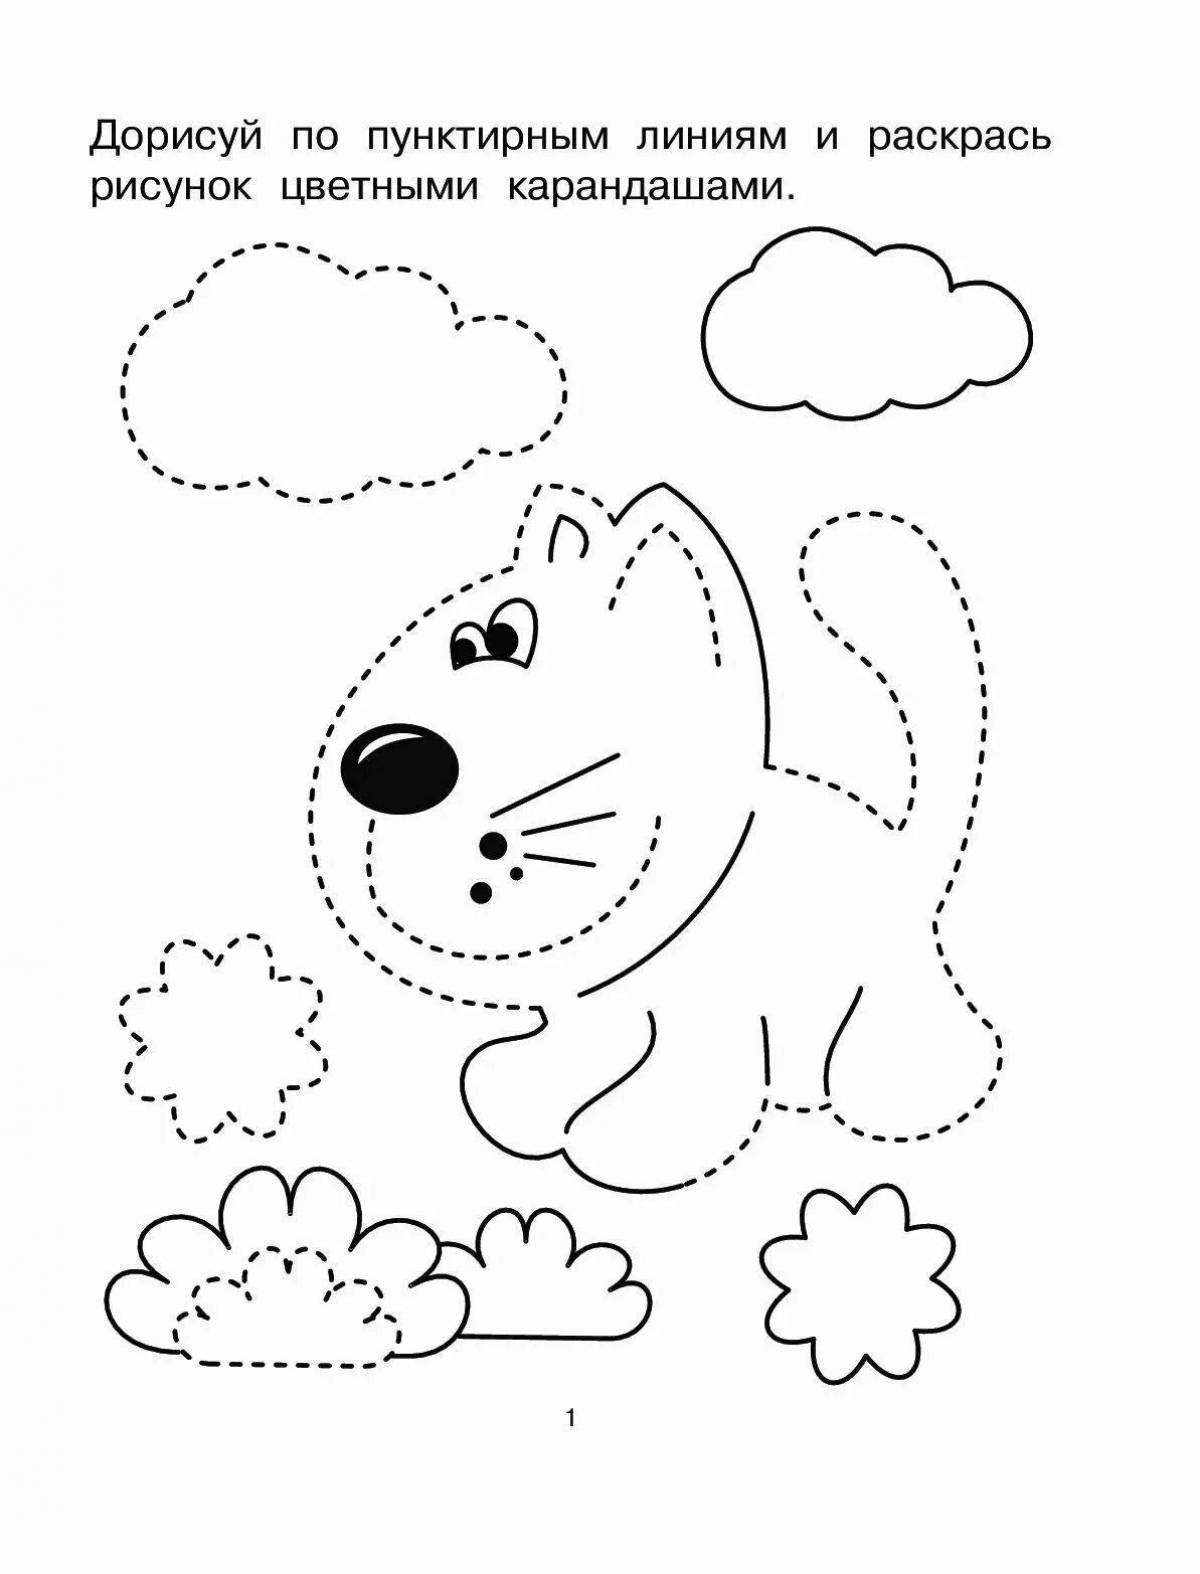 Color-frenzy coloring page for 2 year olds